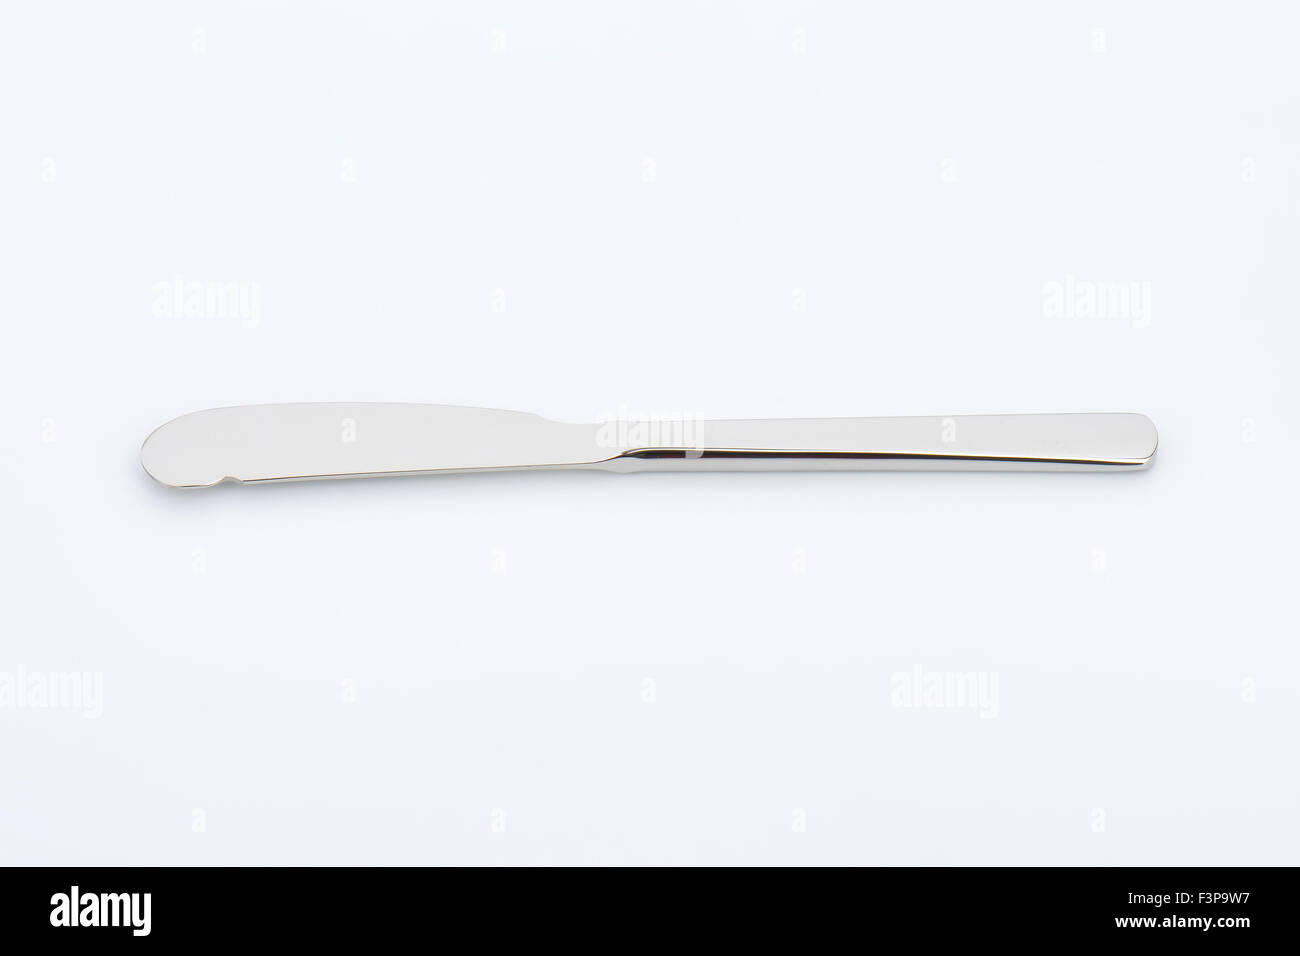 https://c8.alamy.com/comp/F3P9W7/clean-butter-knife-on-white-background-F3P9W7.jpg